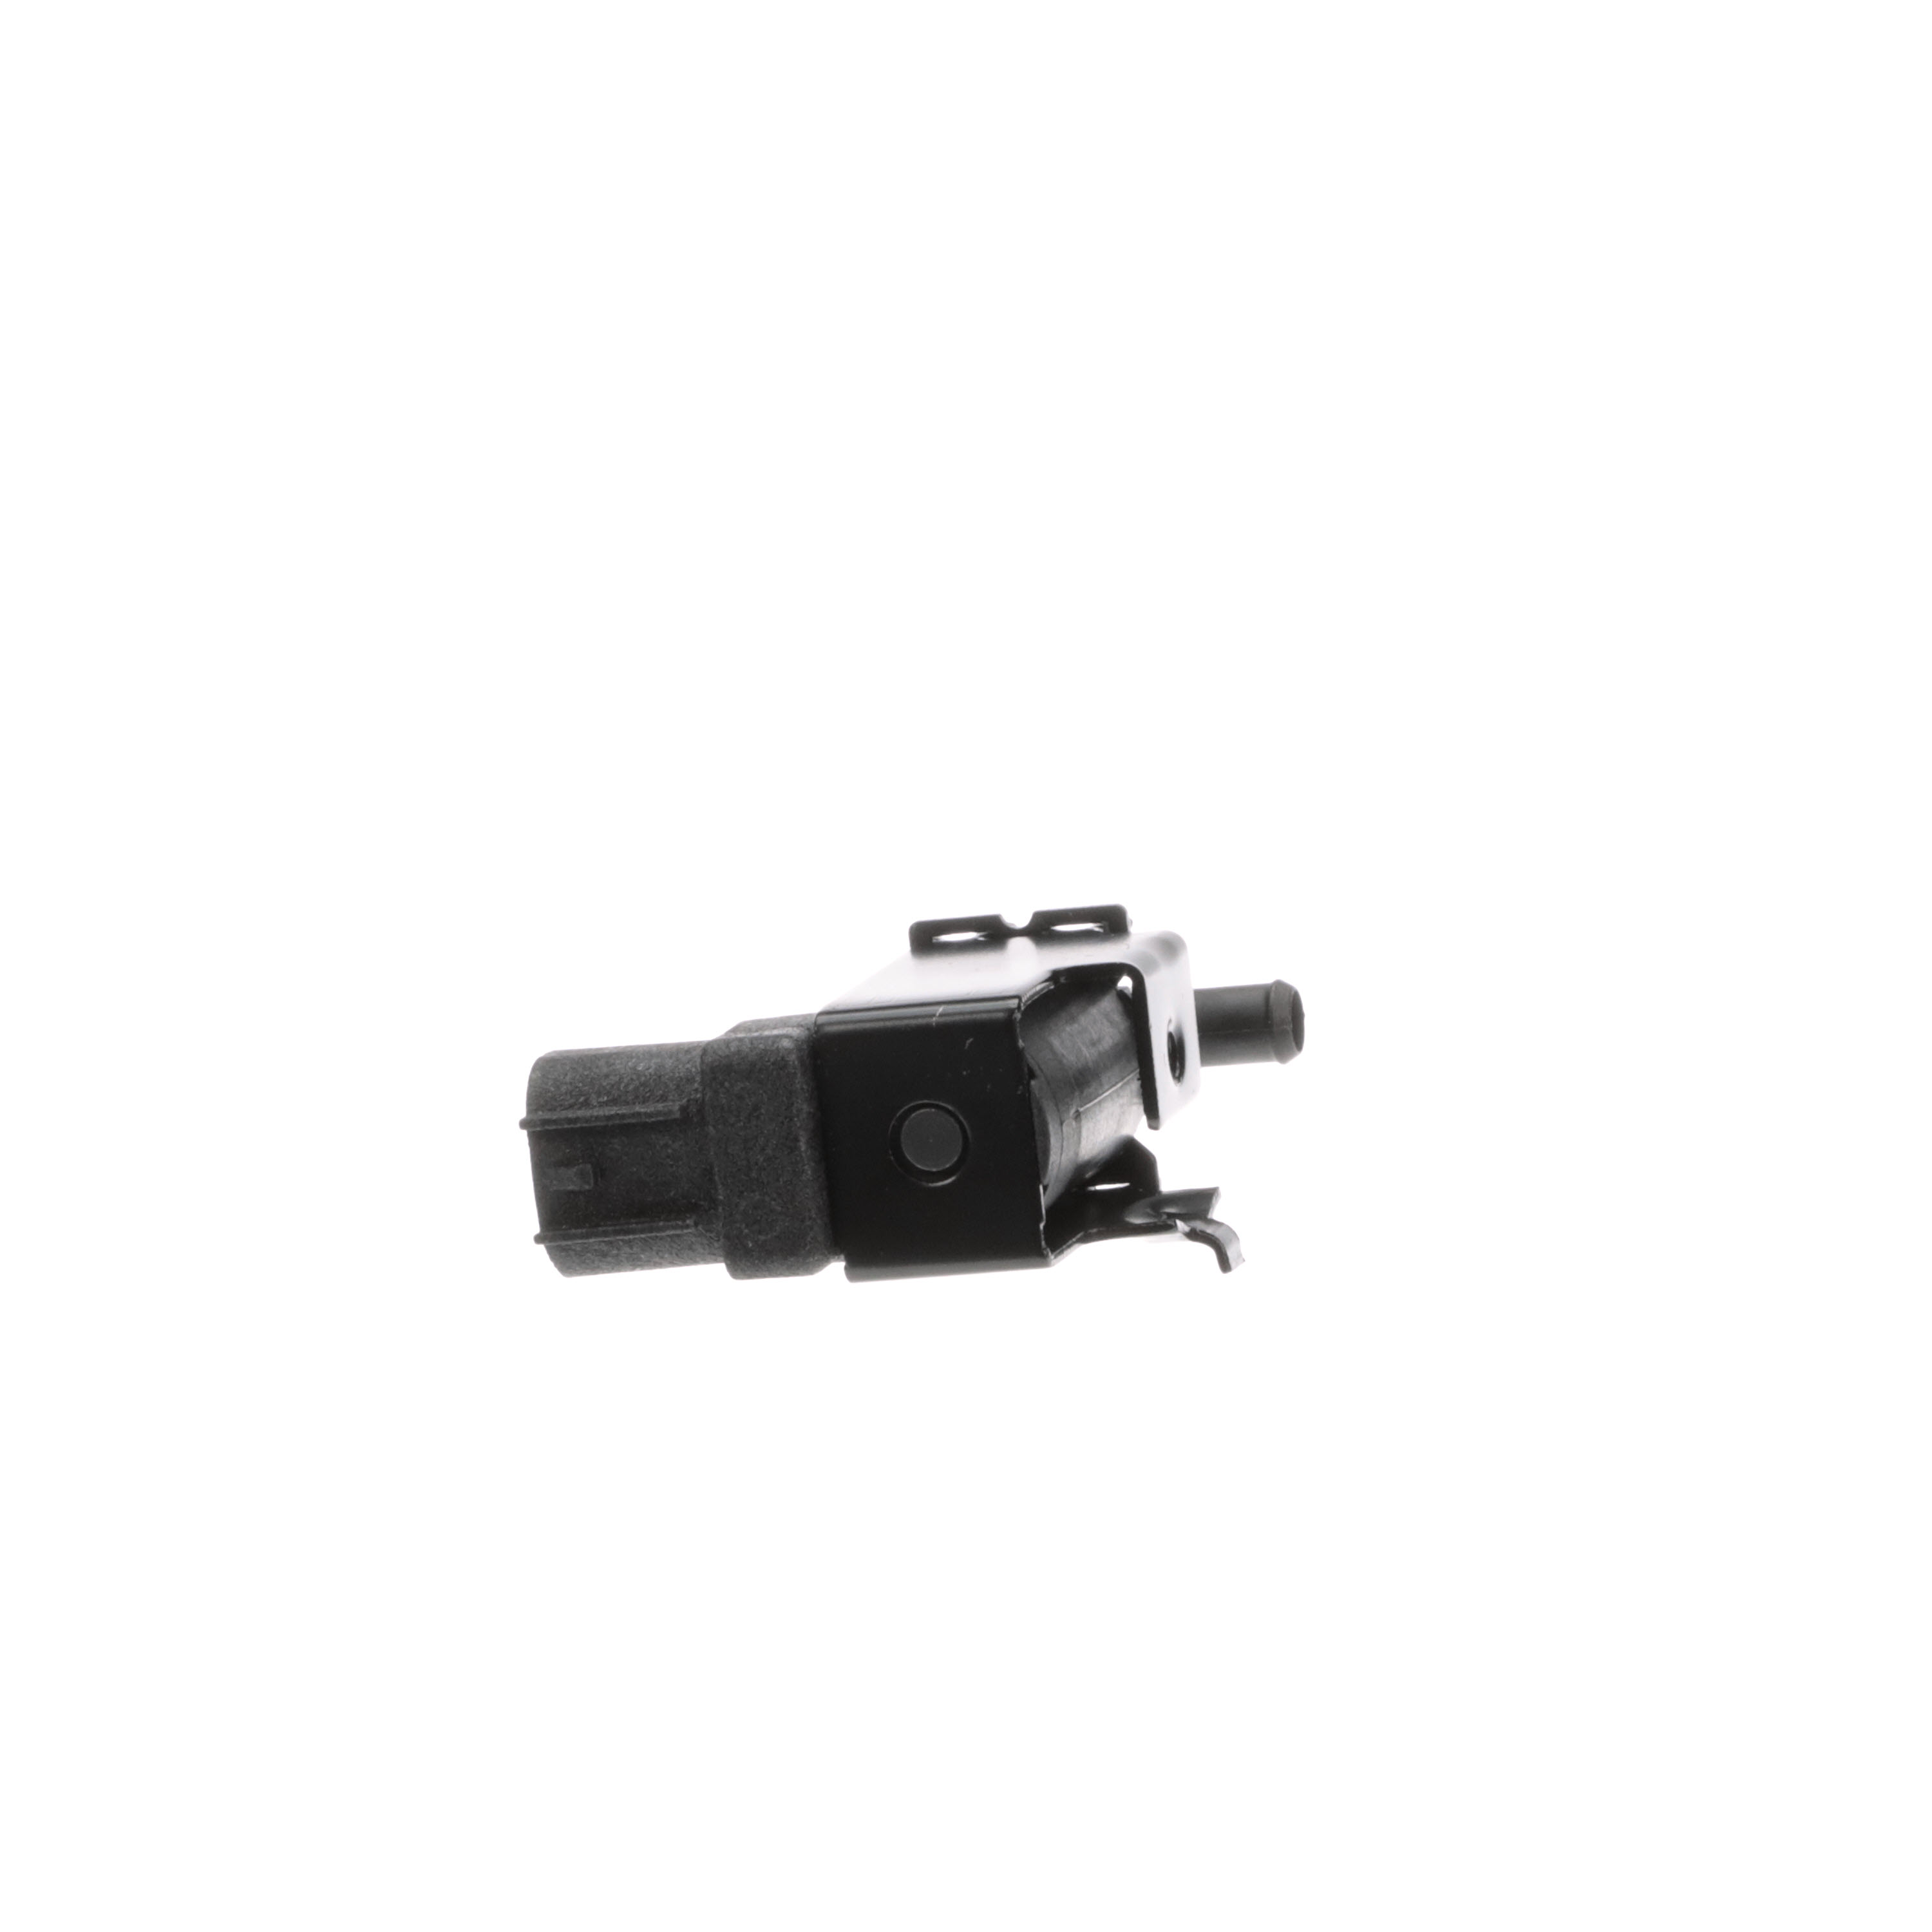 Dorman 911-601 Vacuum Switching Valve for Specific Lexus Toyota Models  Fits select: 2000-2004 TOYOTA CAMRY, 2000-2002 TOYOTA 4RUNNER